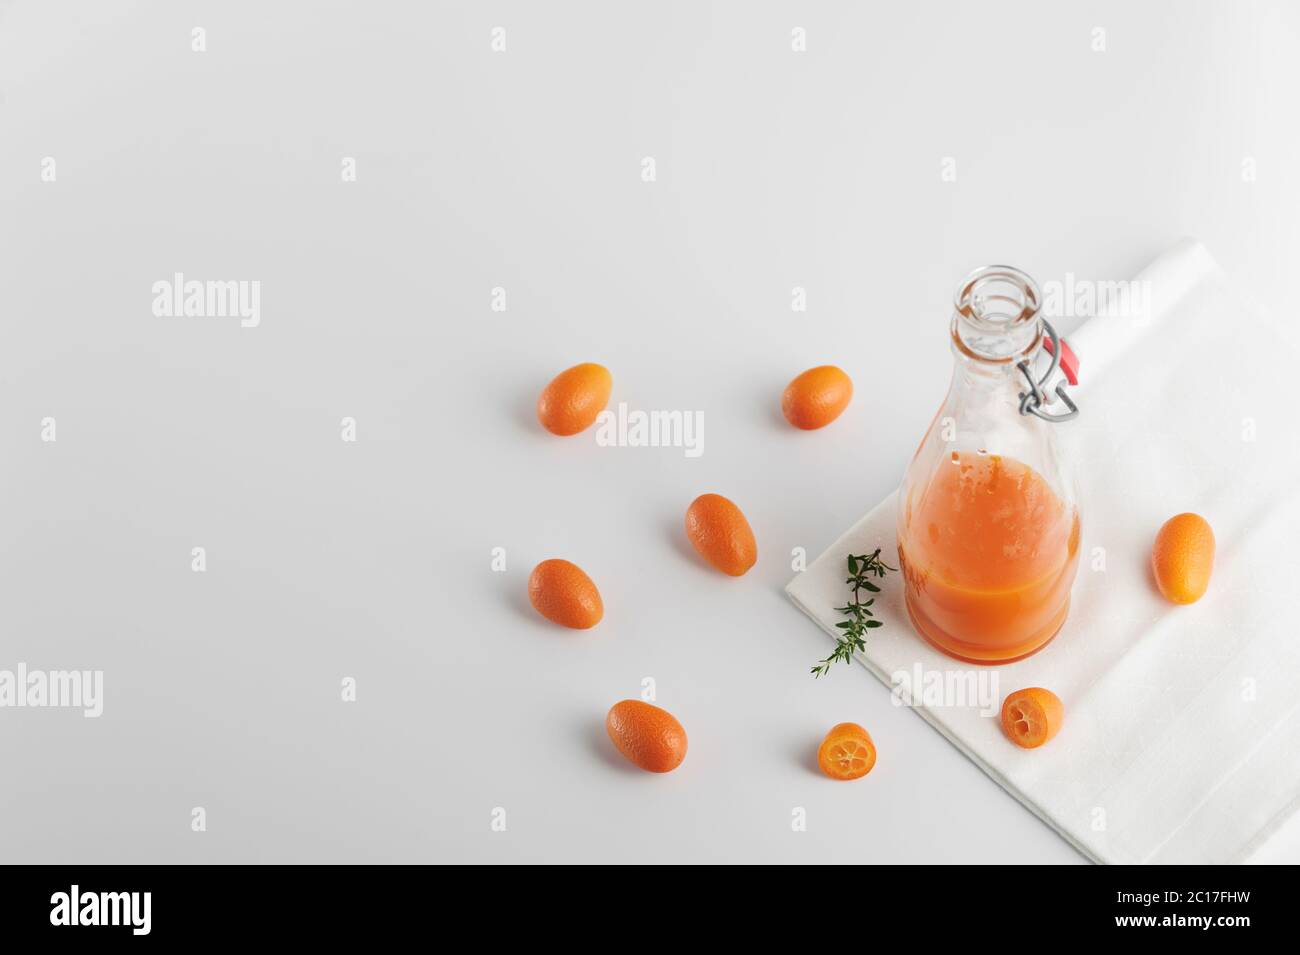 Healthy detox juice made with  tangerines  and kumquats in the glass bottle over white background.Horizontal orientation with space for text. Stock Photo